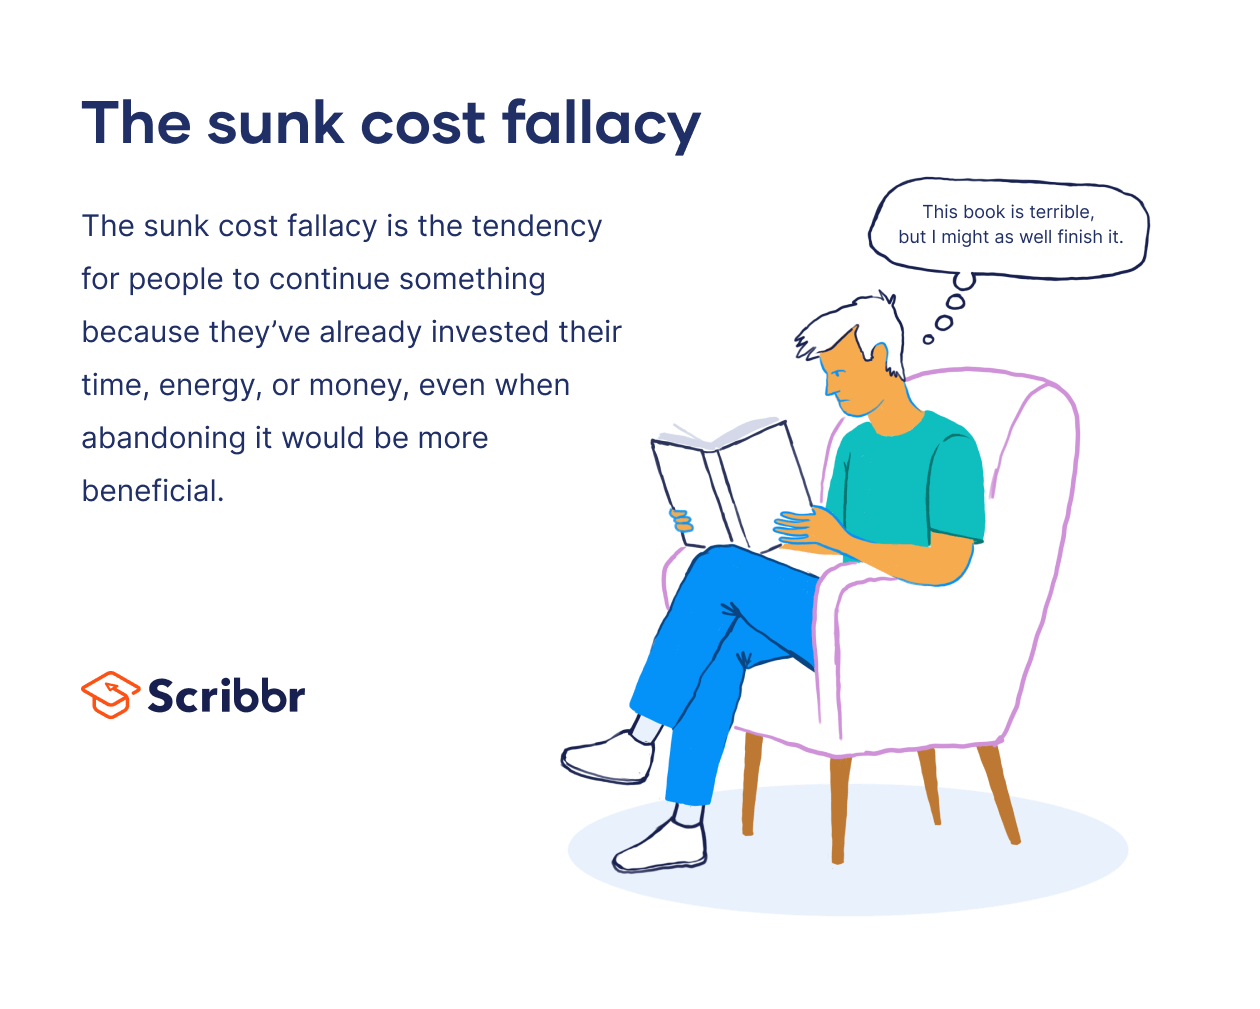 The sunk cost fallacy